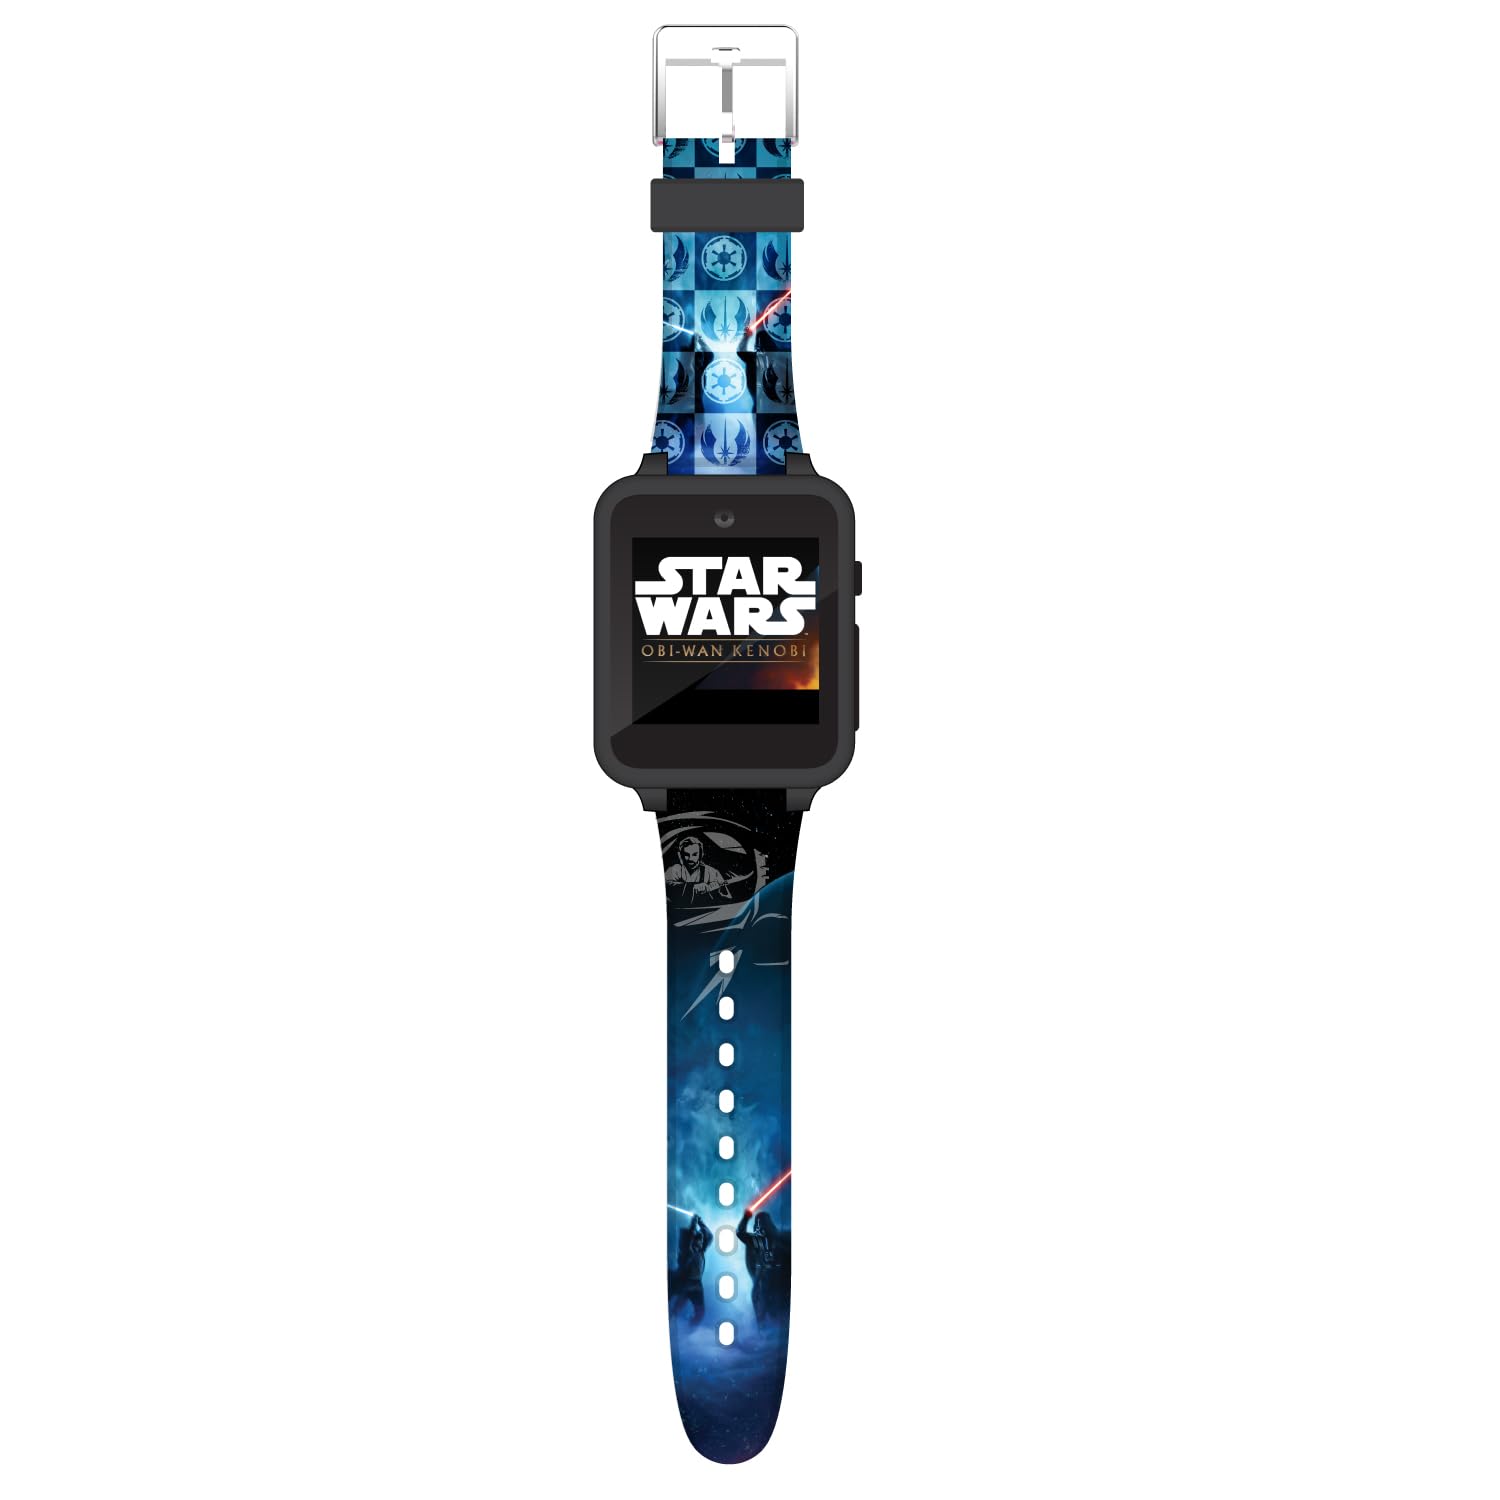 Accutime Kids Star Wars Blue Educational Learning Touchscreen Smart Watch Toy for Boys, Girls - Selfie Cam, Alarm, Calculator & More (Model: STW4069AZ)